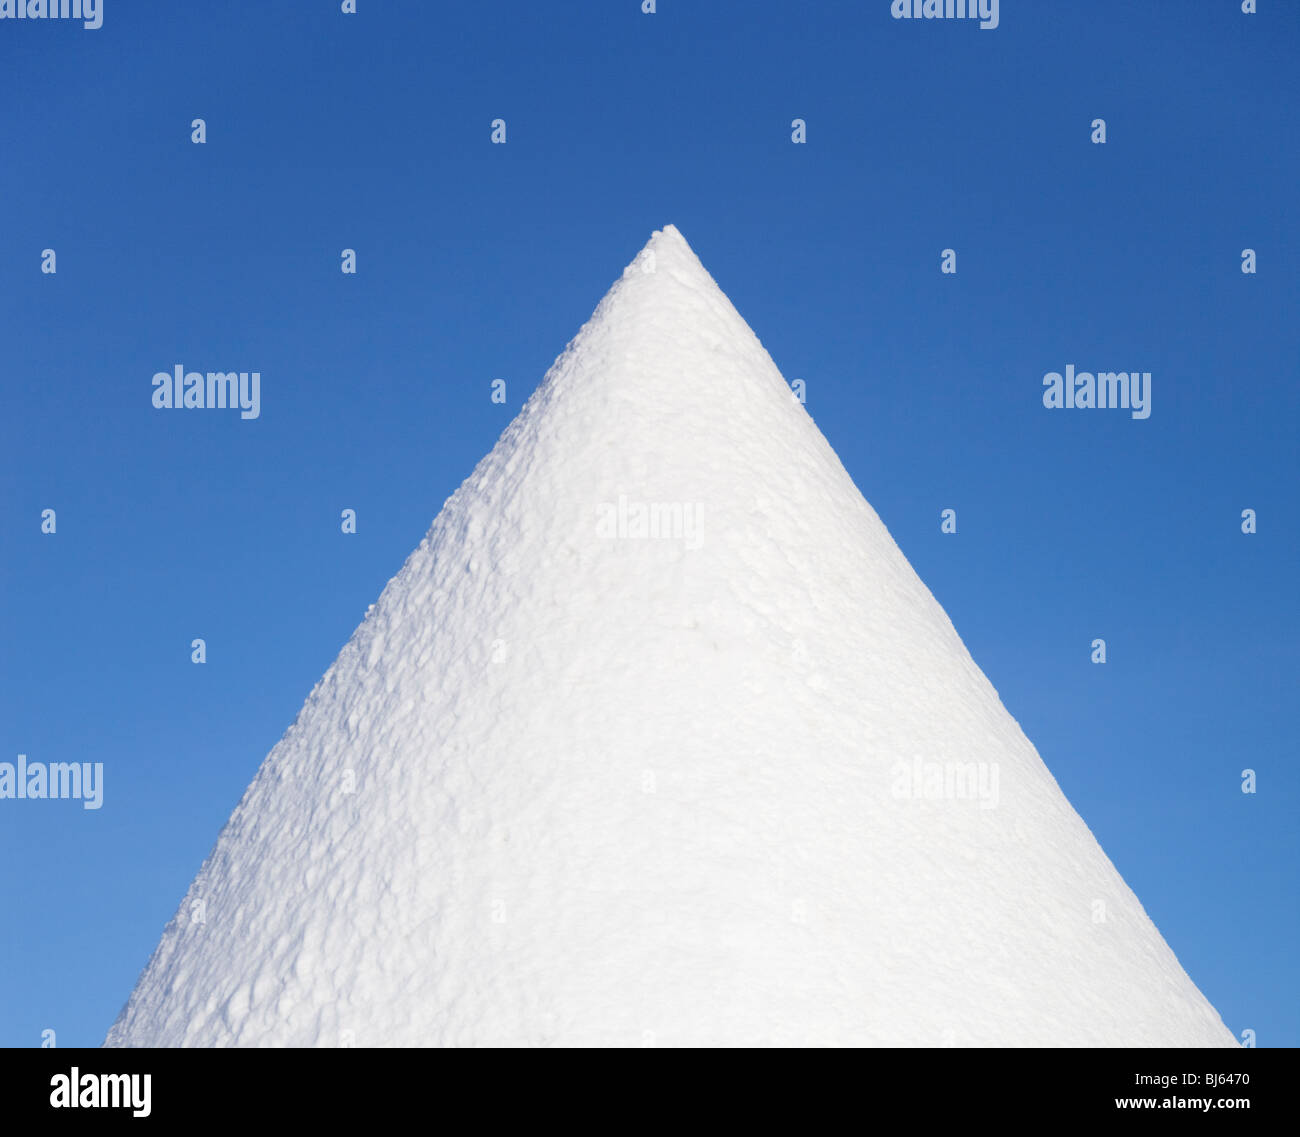 Tip of the outer wall of a snow structure made of compacted snow and ice in Finland at Winter Stock Photo